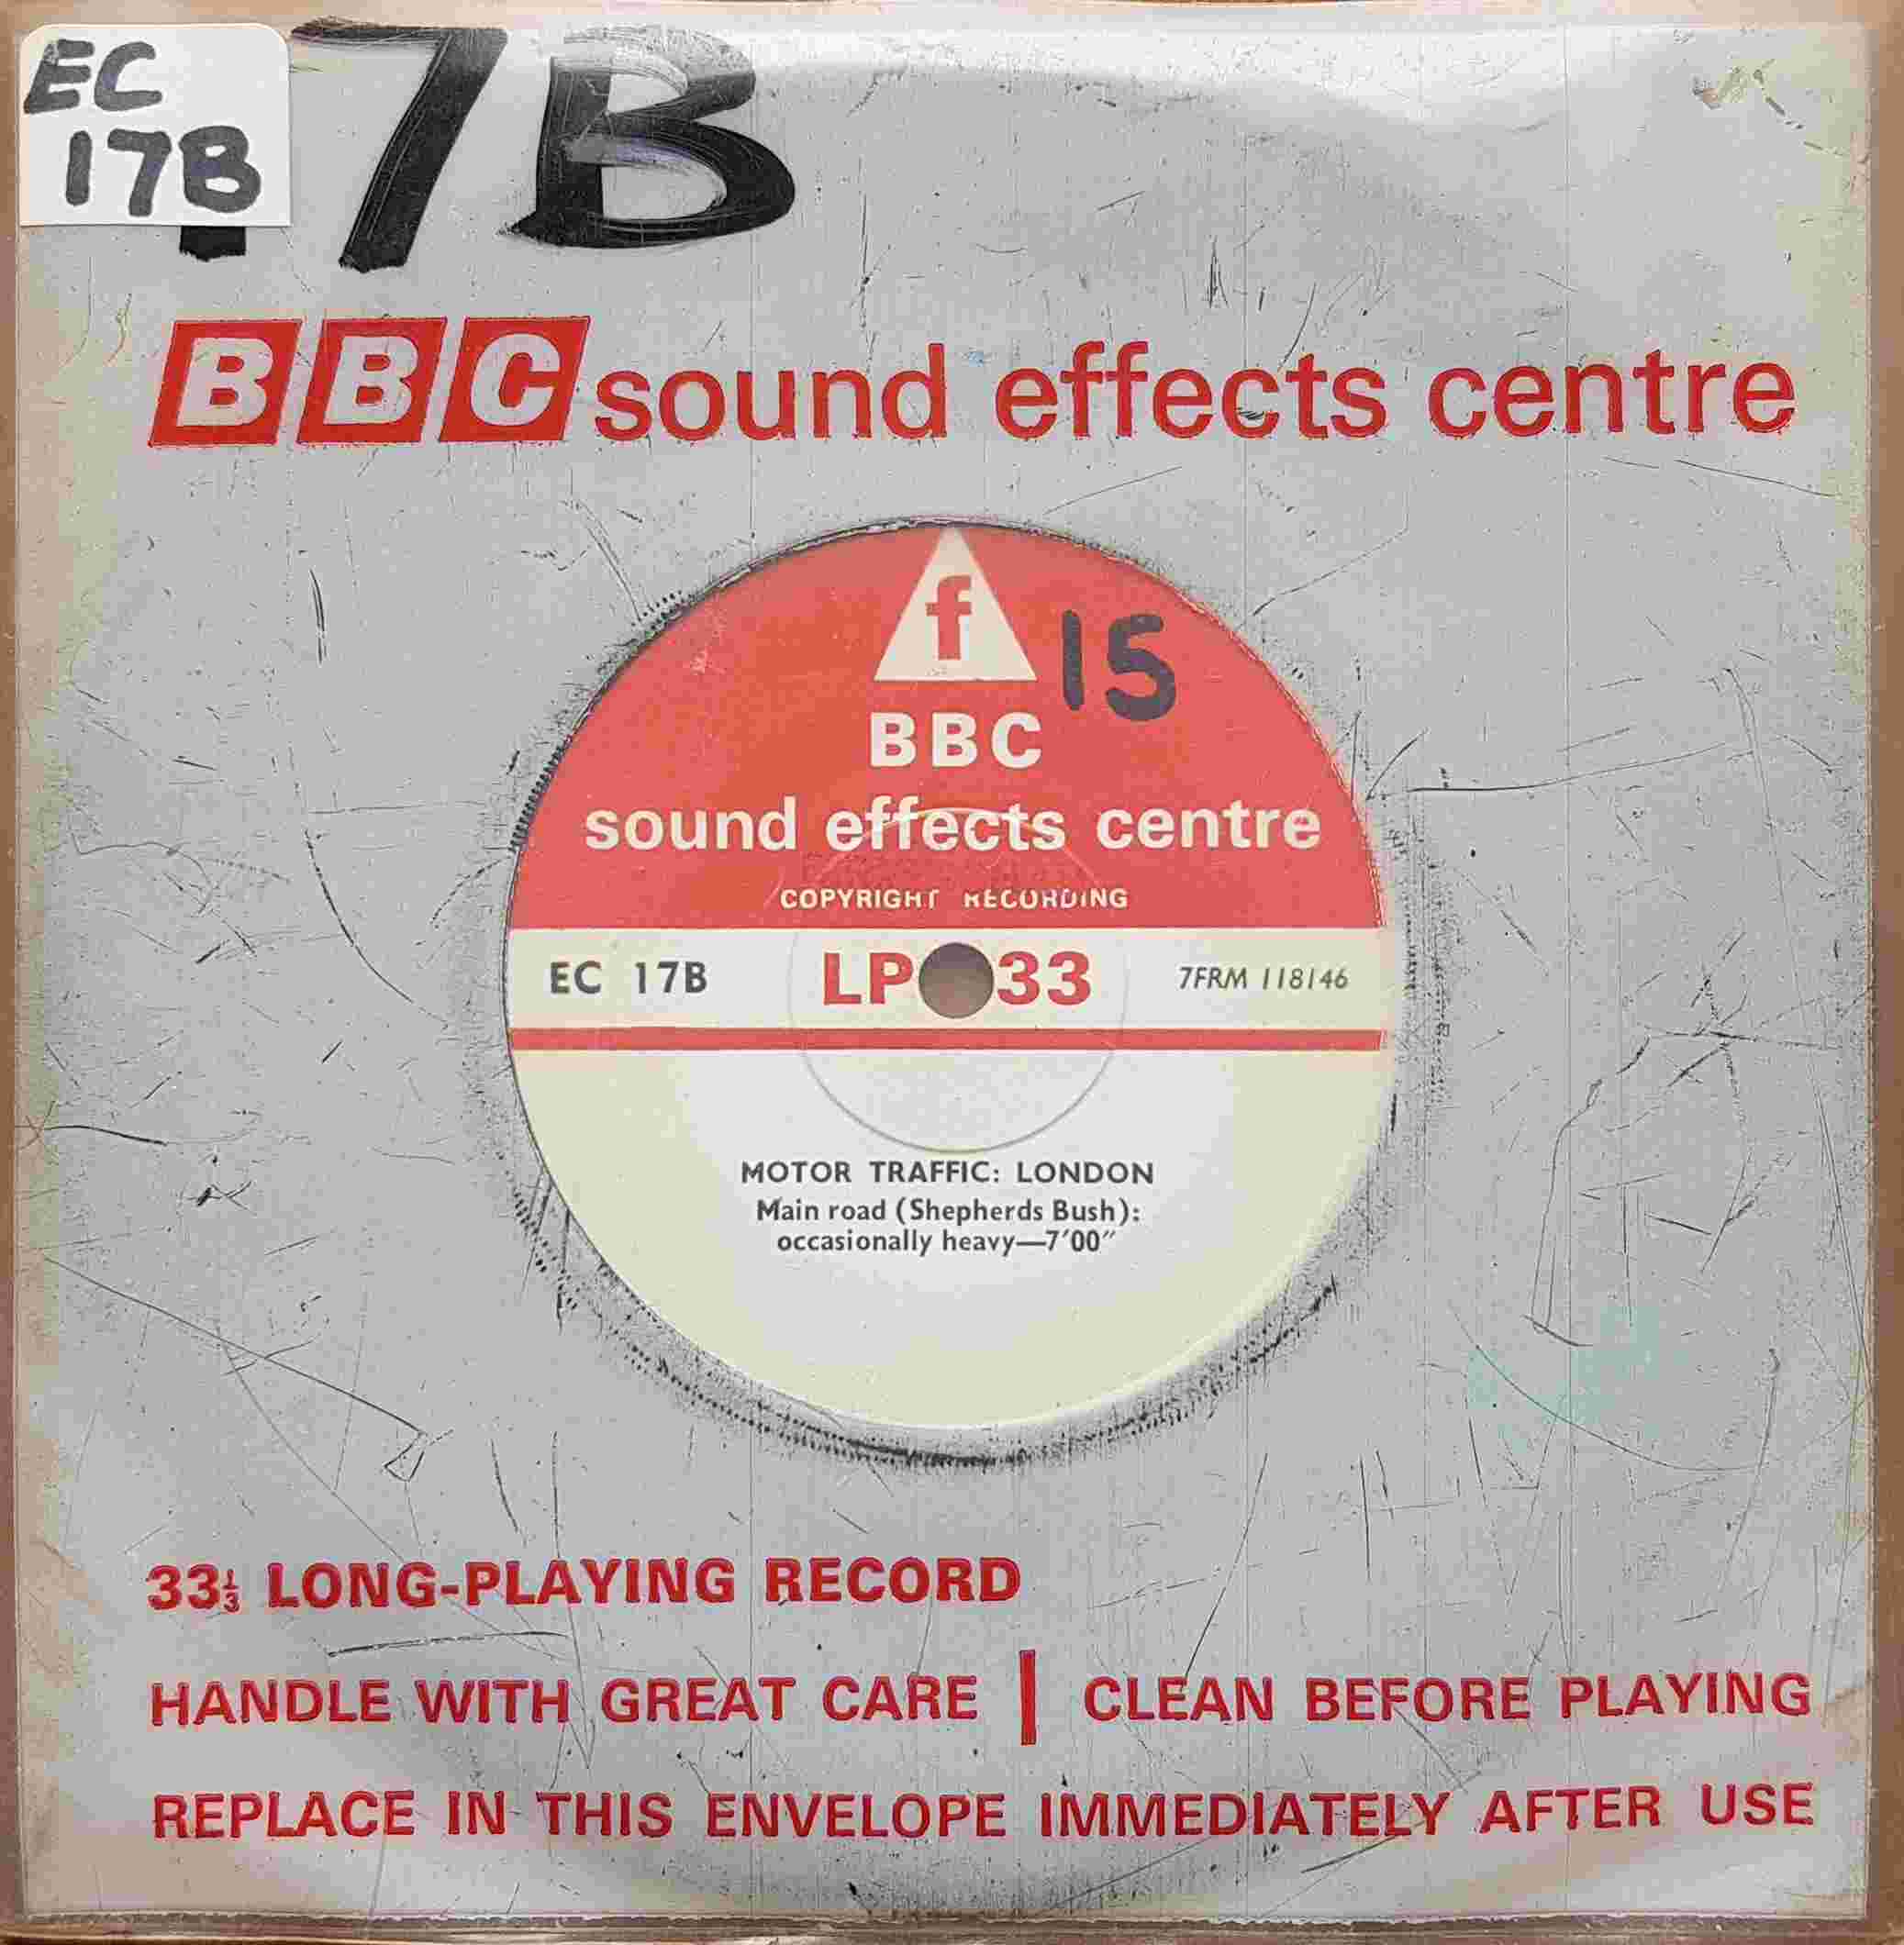 Picture of EC 17B Motor traffic: London single by artist Not registered from the BBC records and Tapes library